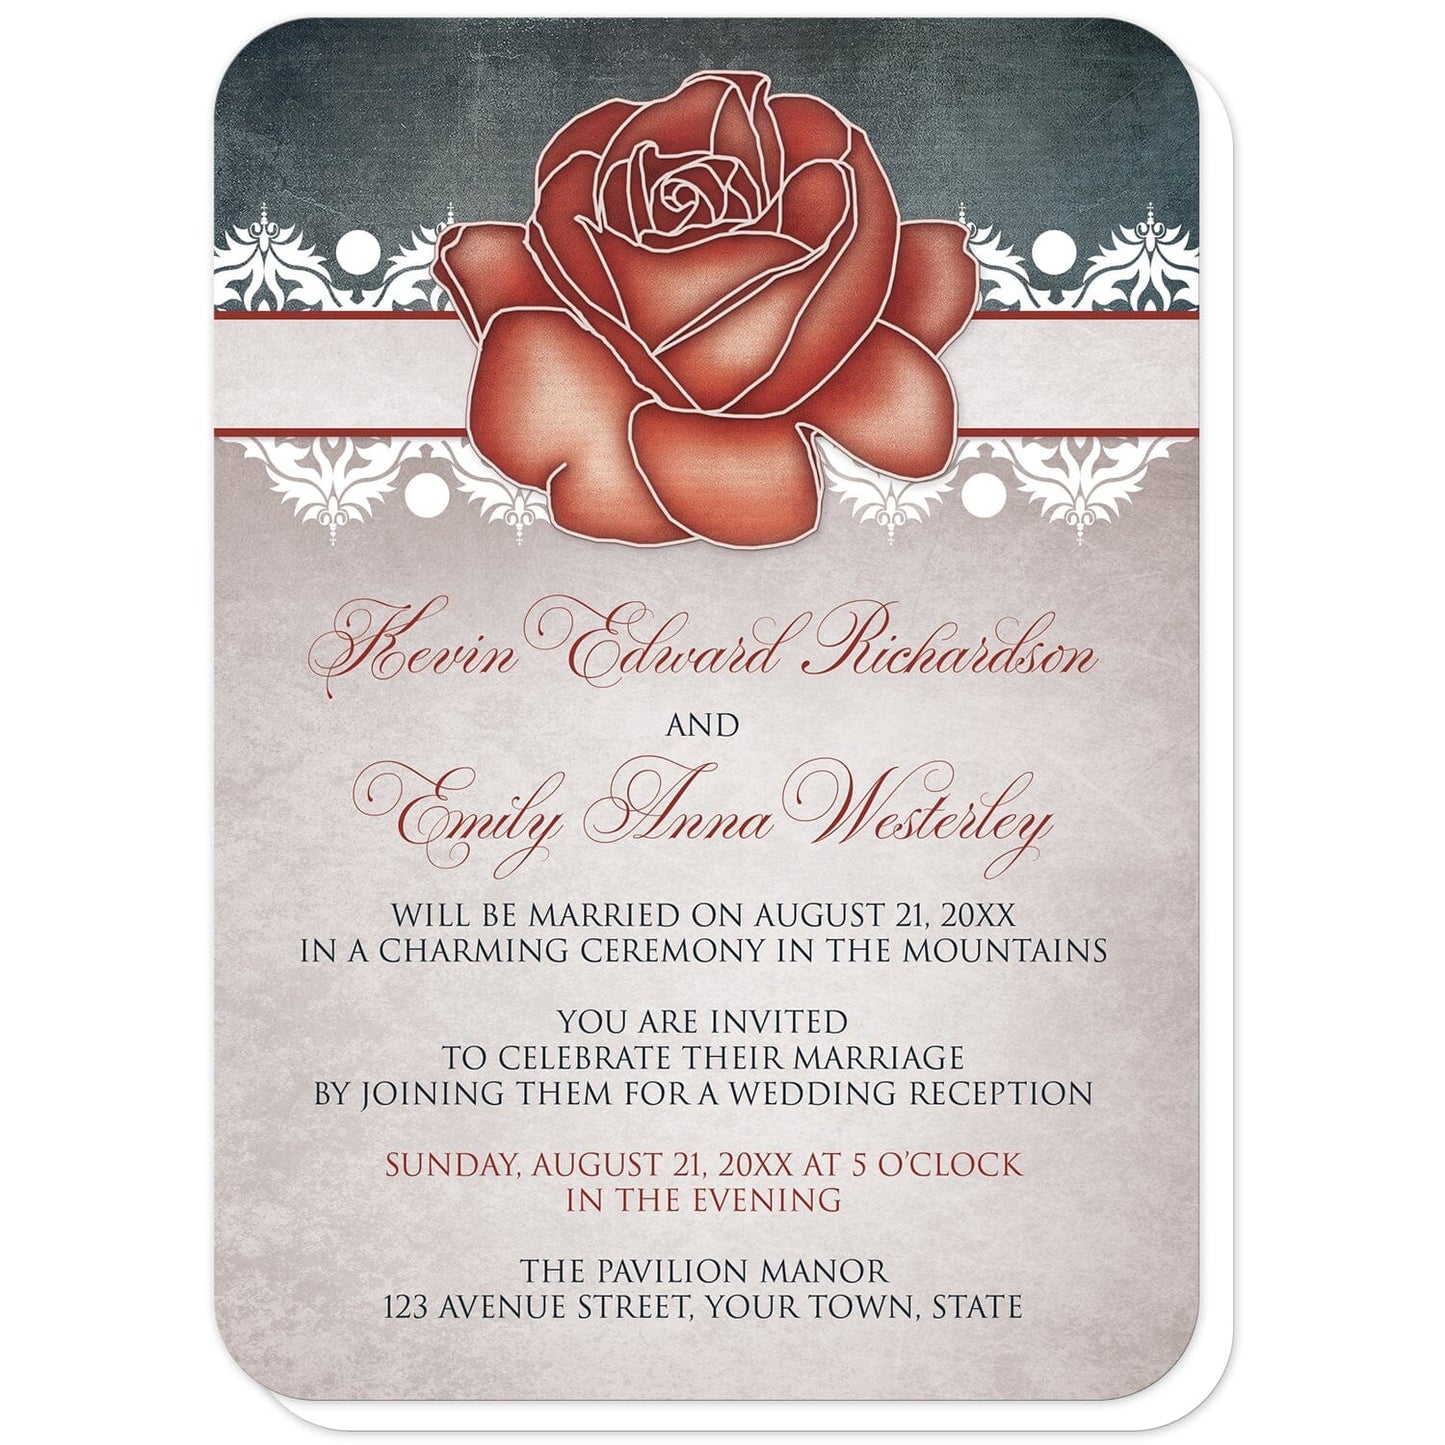 Rustic Country Rose Blue Reception Only Invitations (with rounded corners) at Artistically Invited. Rustic country rose blue reception only invitations designed with an eclectic mix of rustic, vintage, and modern elements. They feature an artistic red rose at the top over a stripe lined with white damask elements with a dark navy blue design at the top. Your personalized post-wedding reception details are custom printed in red and navy blue over a beige vintage parchment illustration below the rose.